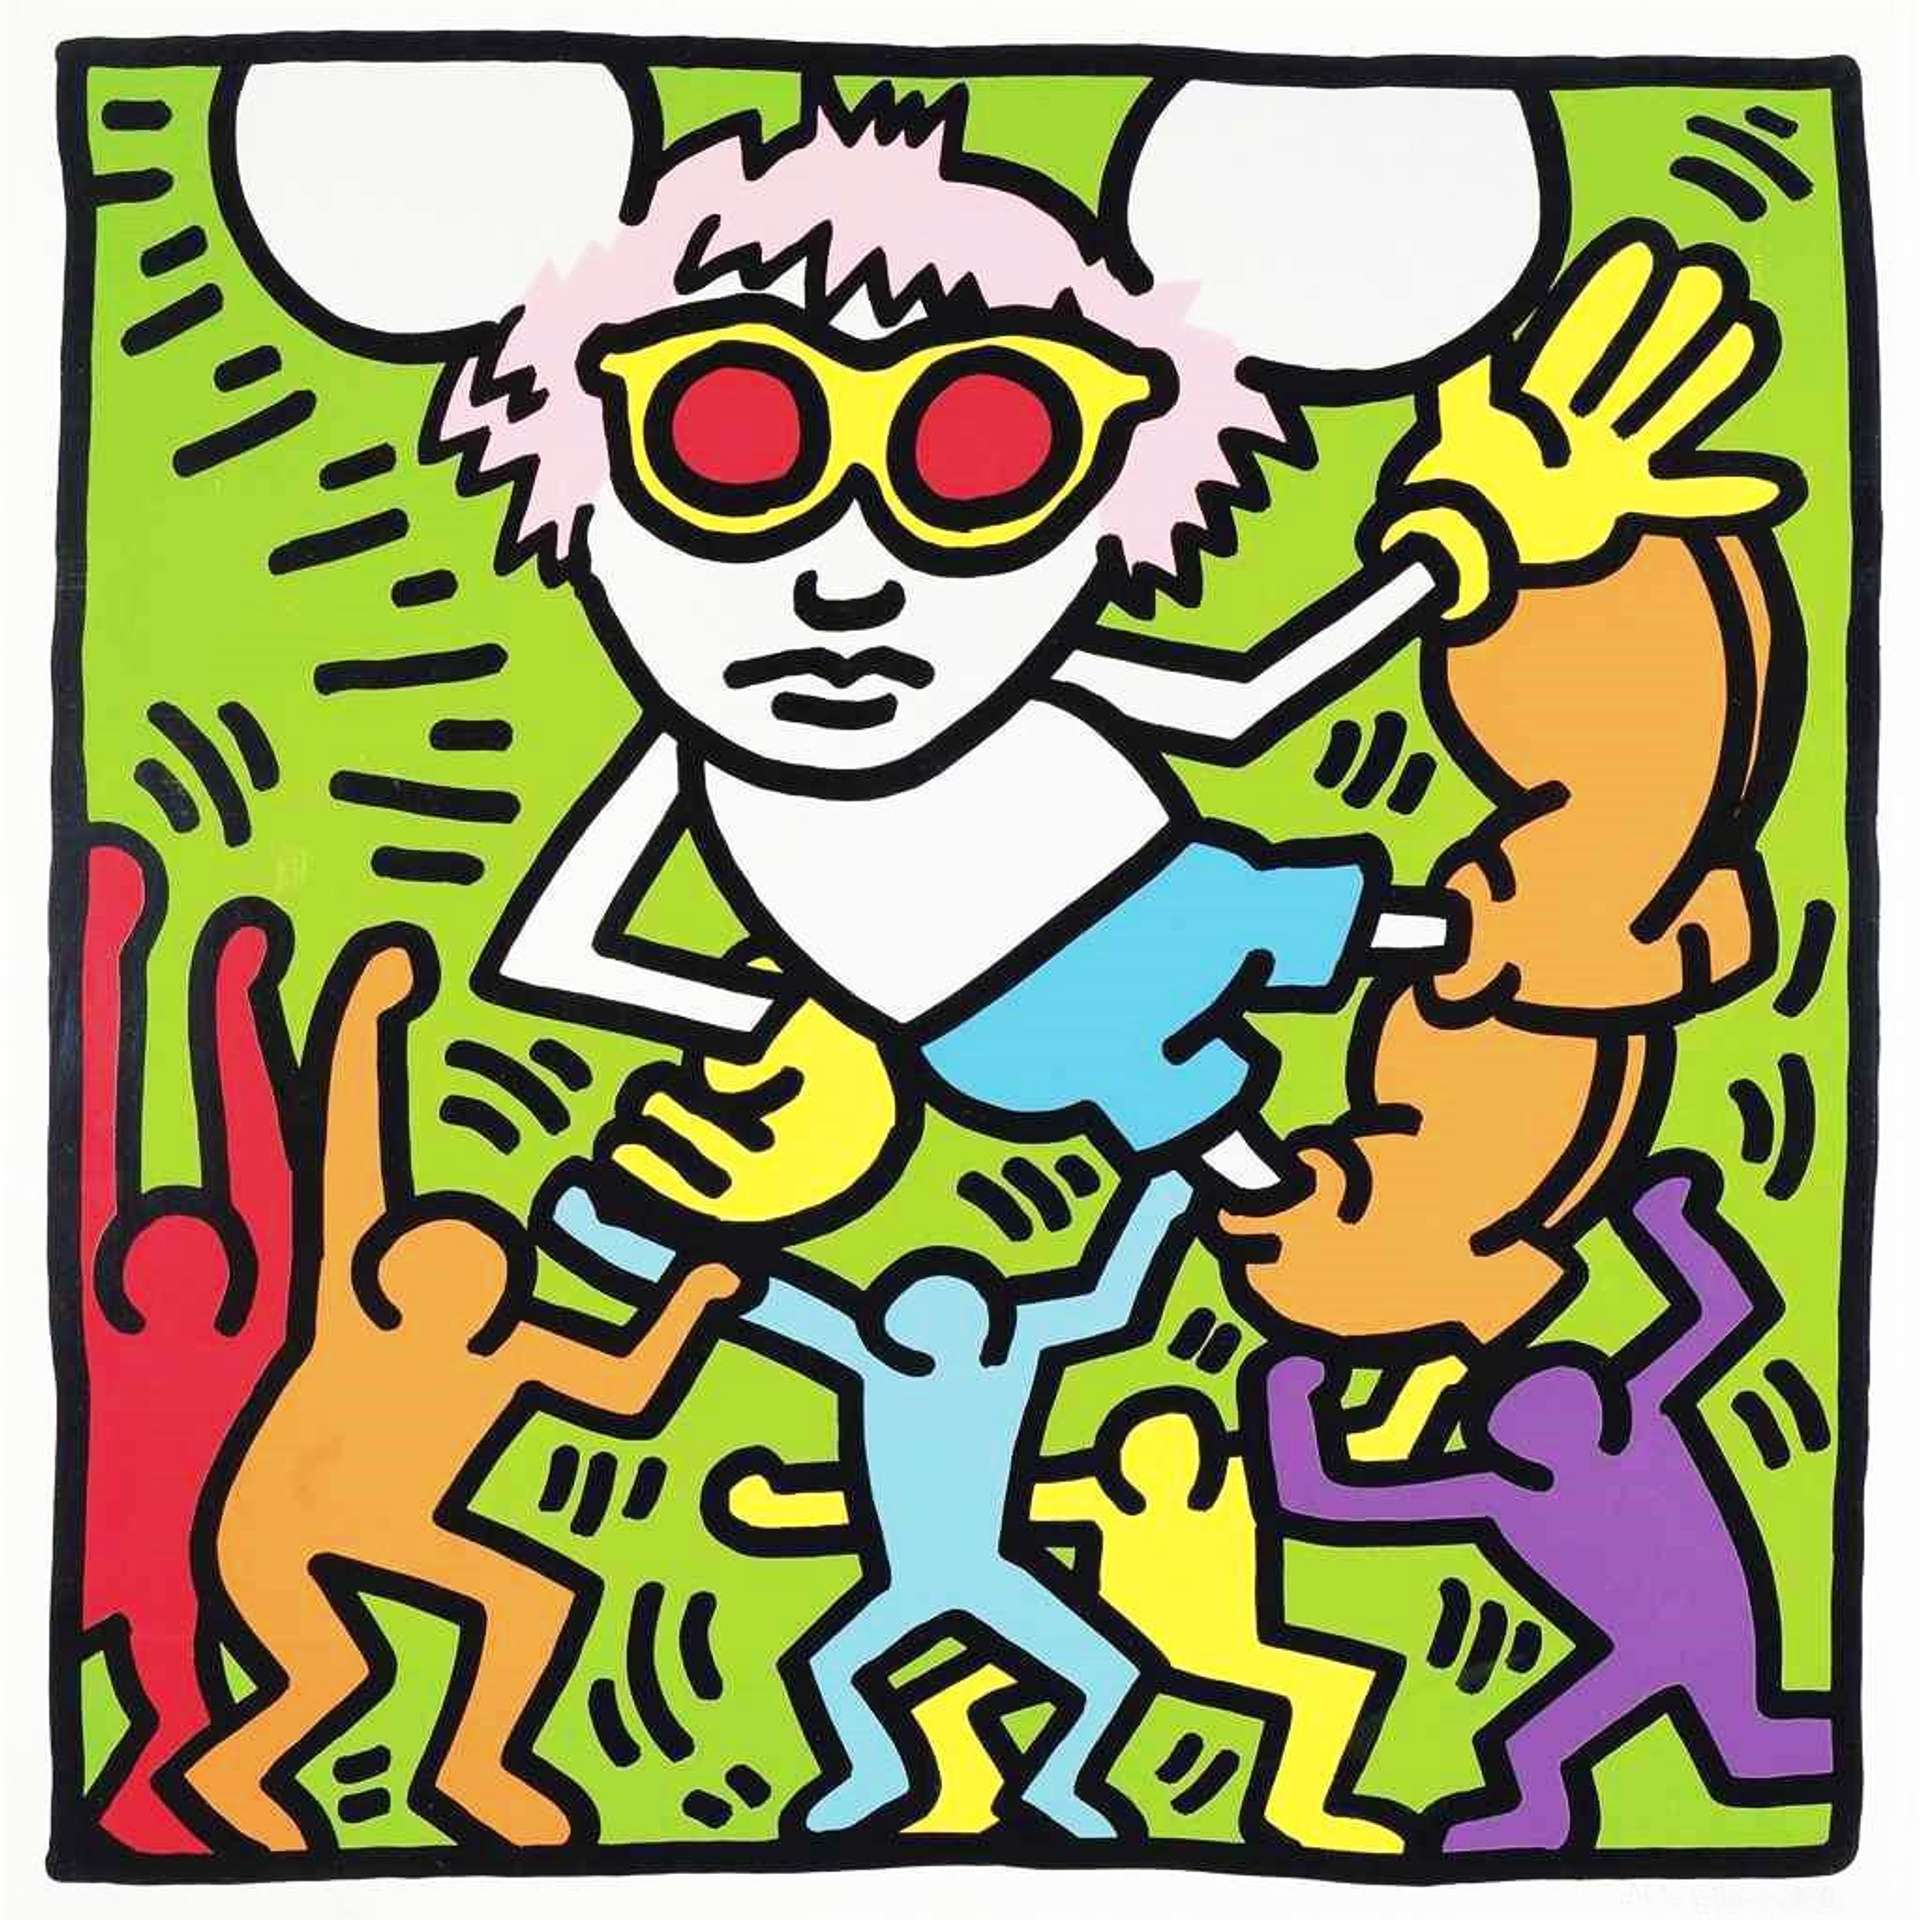 Andy Mouse 2 - Signed Print by Keith Haring 1986 - MyArtBroker